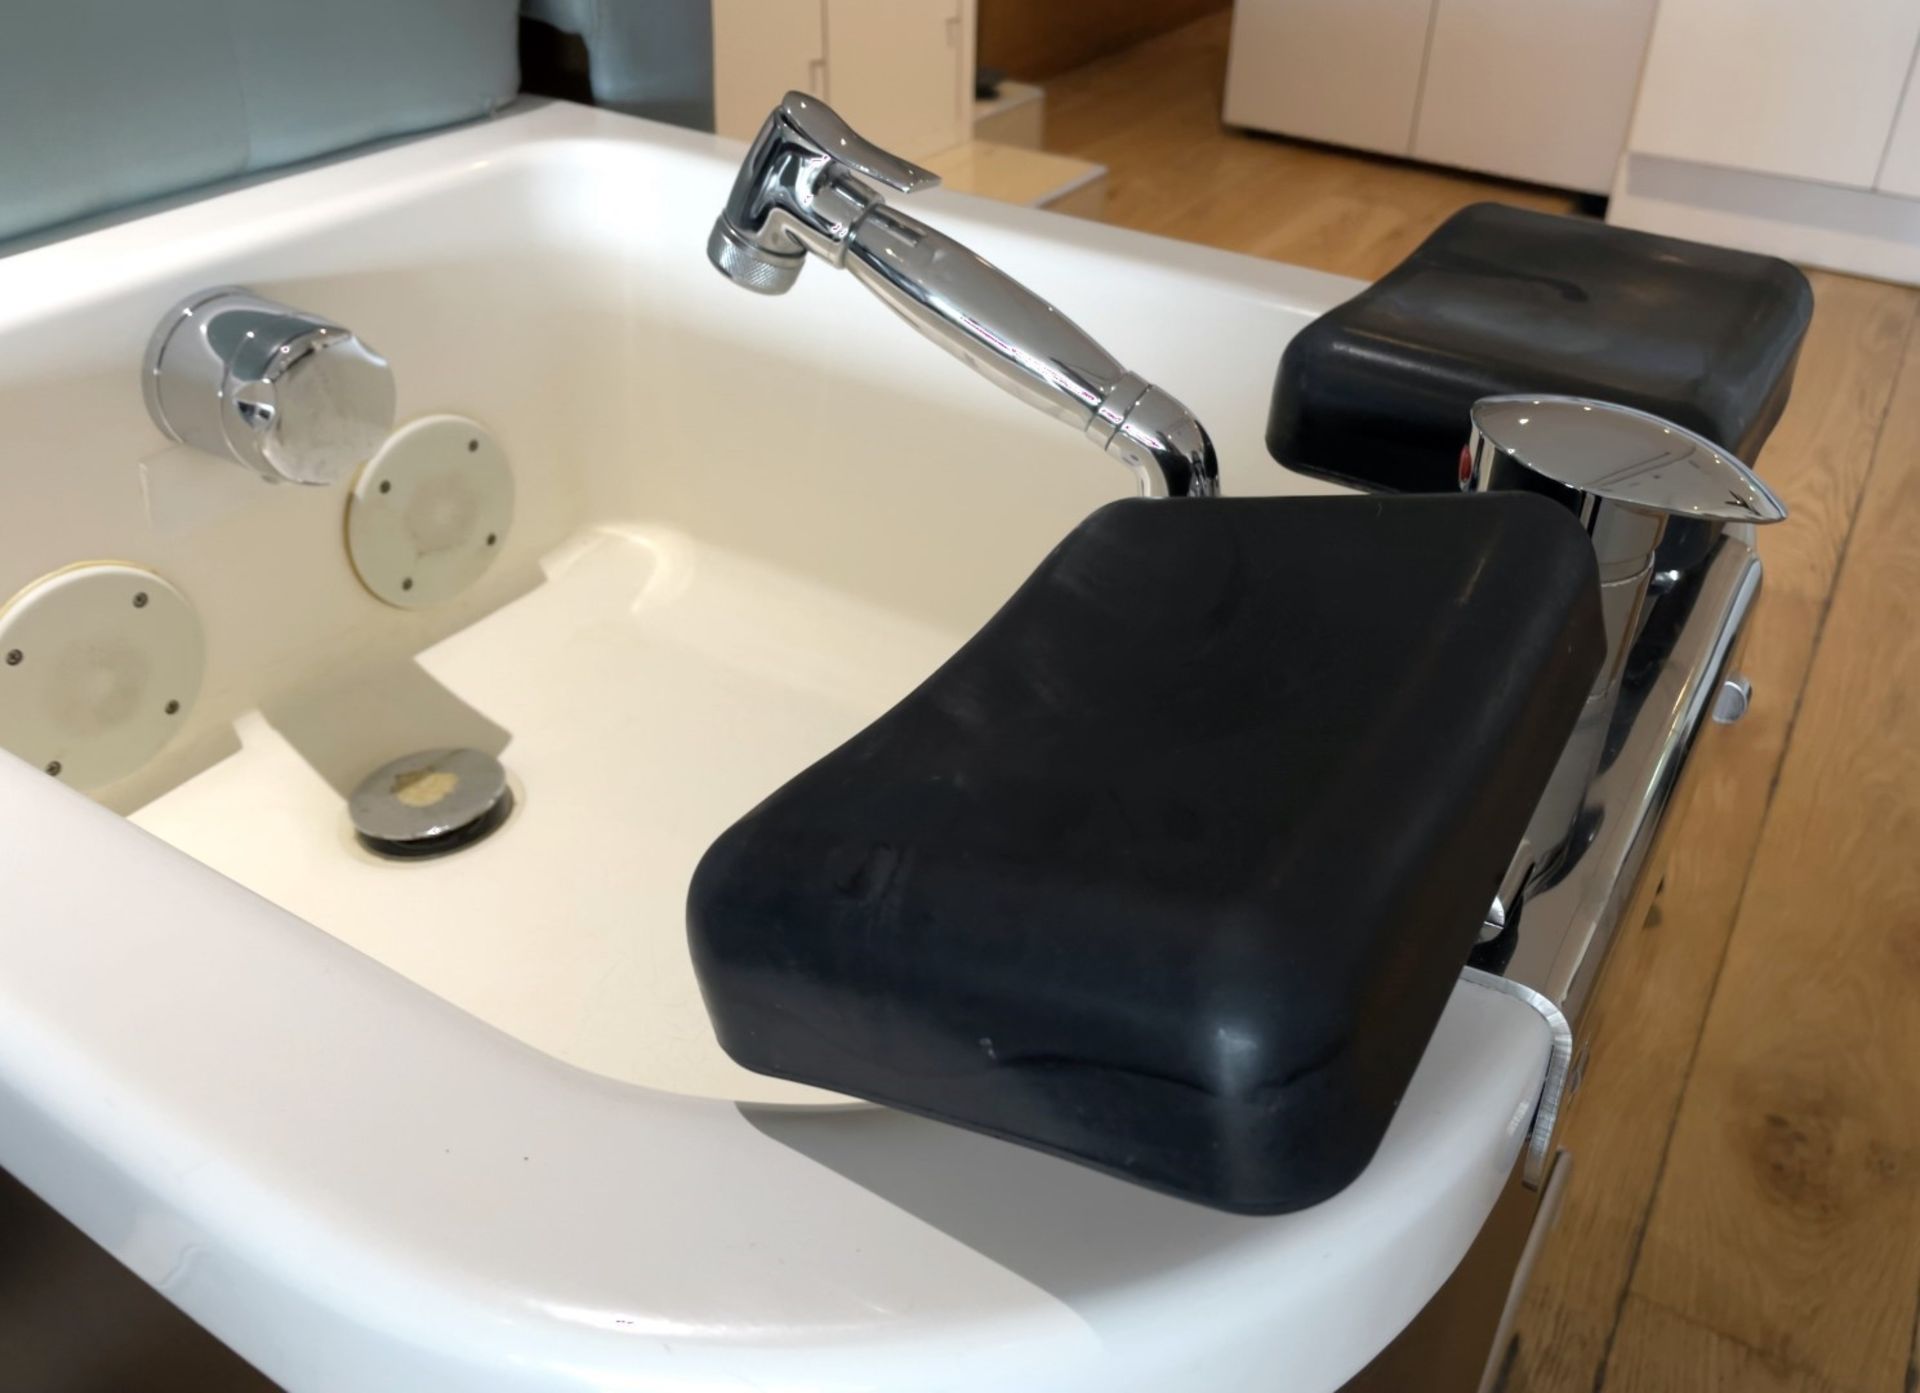 1 x NILO Professional Salon Pedicure Spa Chair With Massage Function - Includes Remote Control - Image 11 of 16